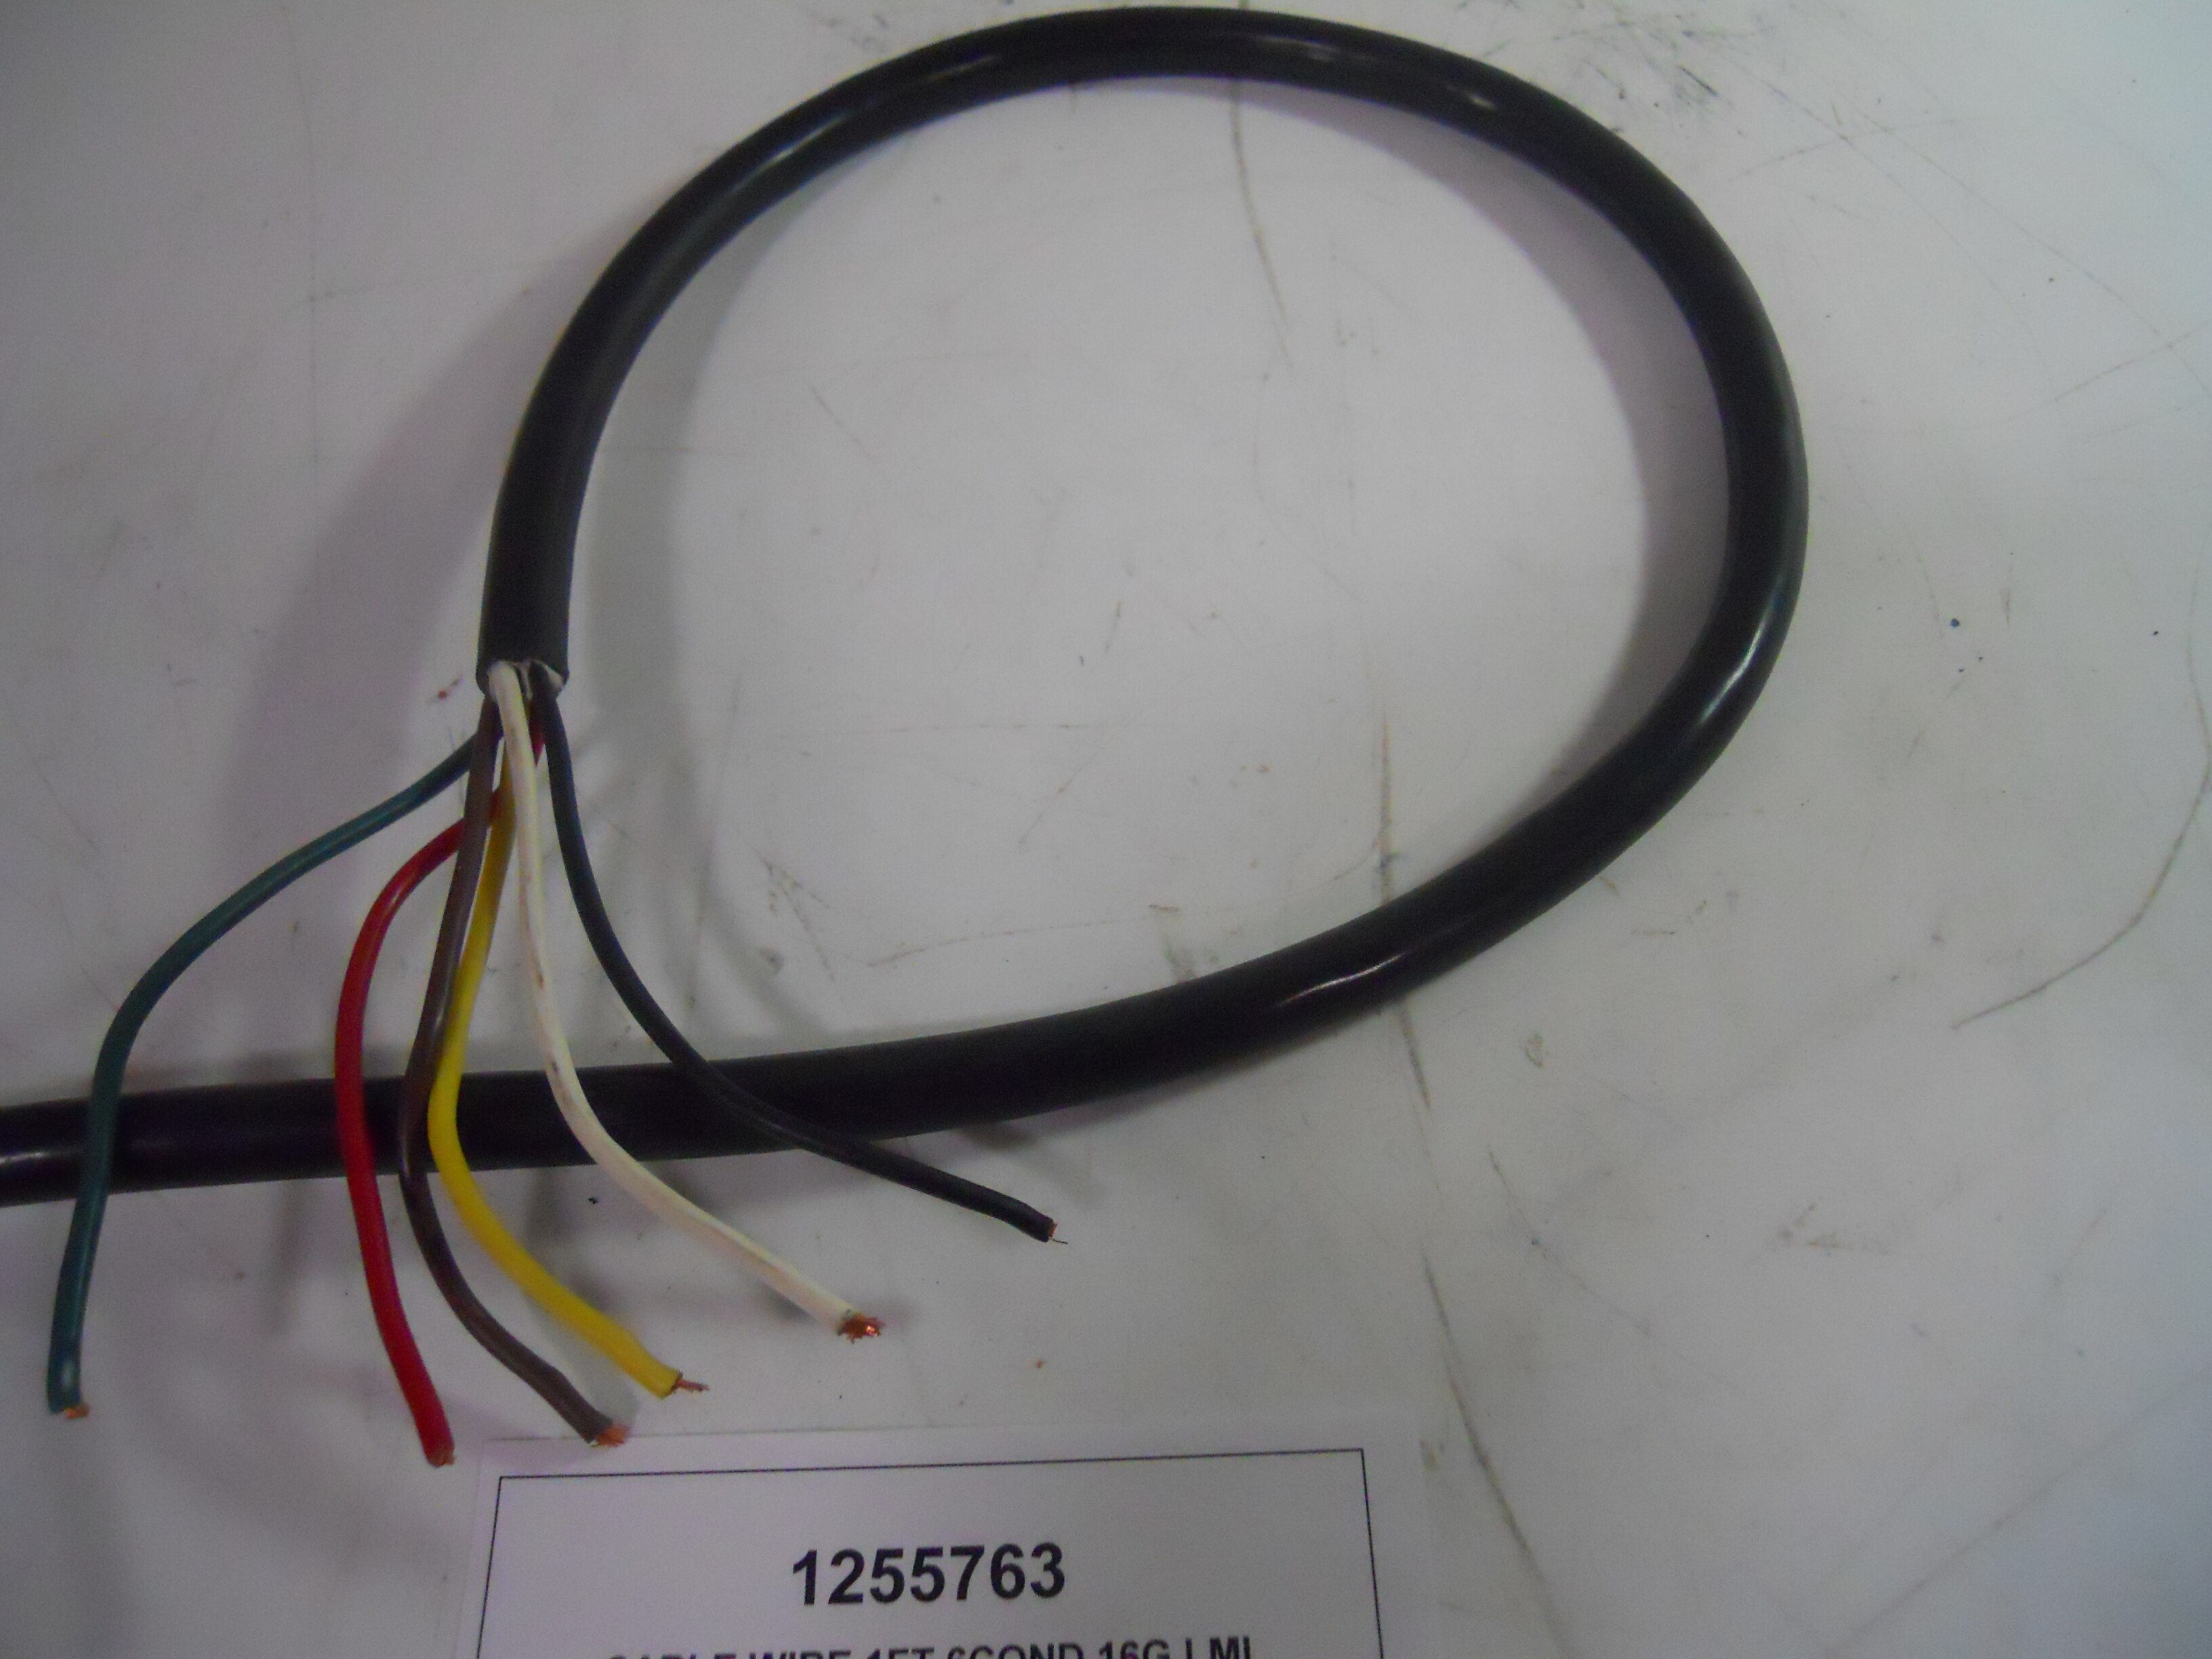 CABLE,WIRE,1FT,6COND 16G,LMI